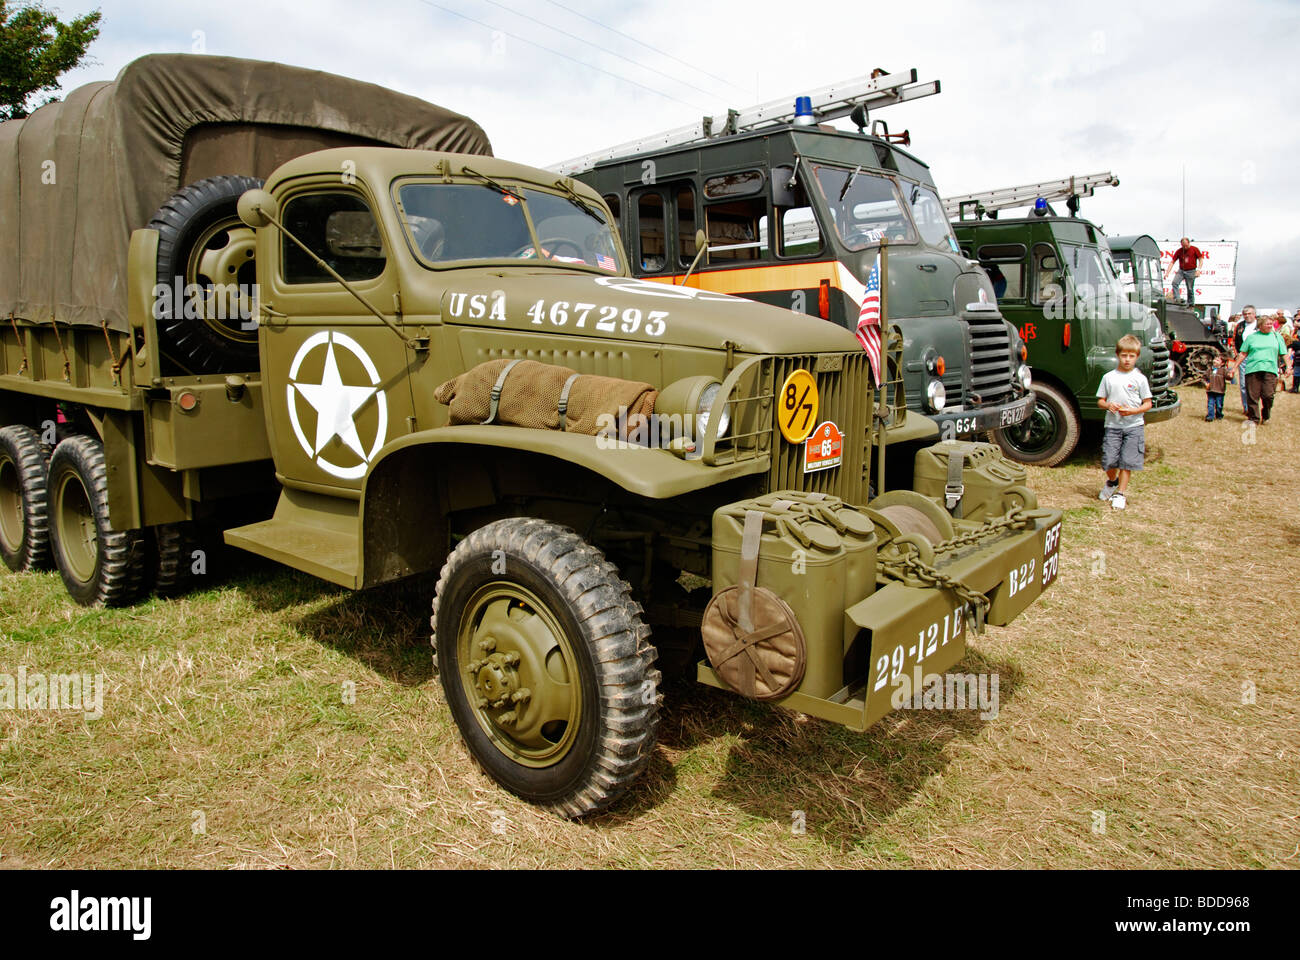 second world war american military vehicles at a vintage vehicle rally in cornwall, uk Stock Photo